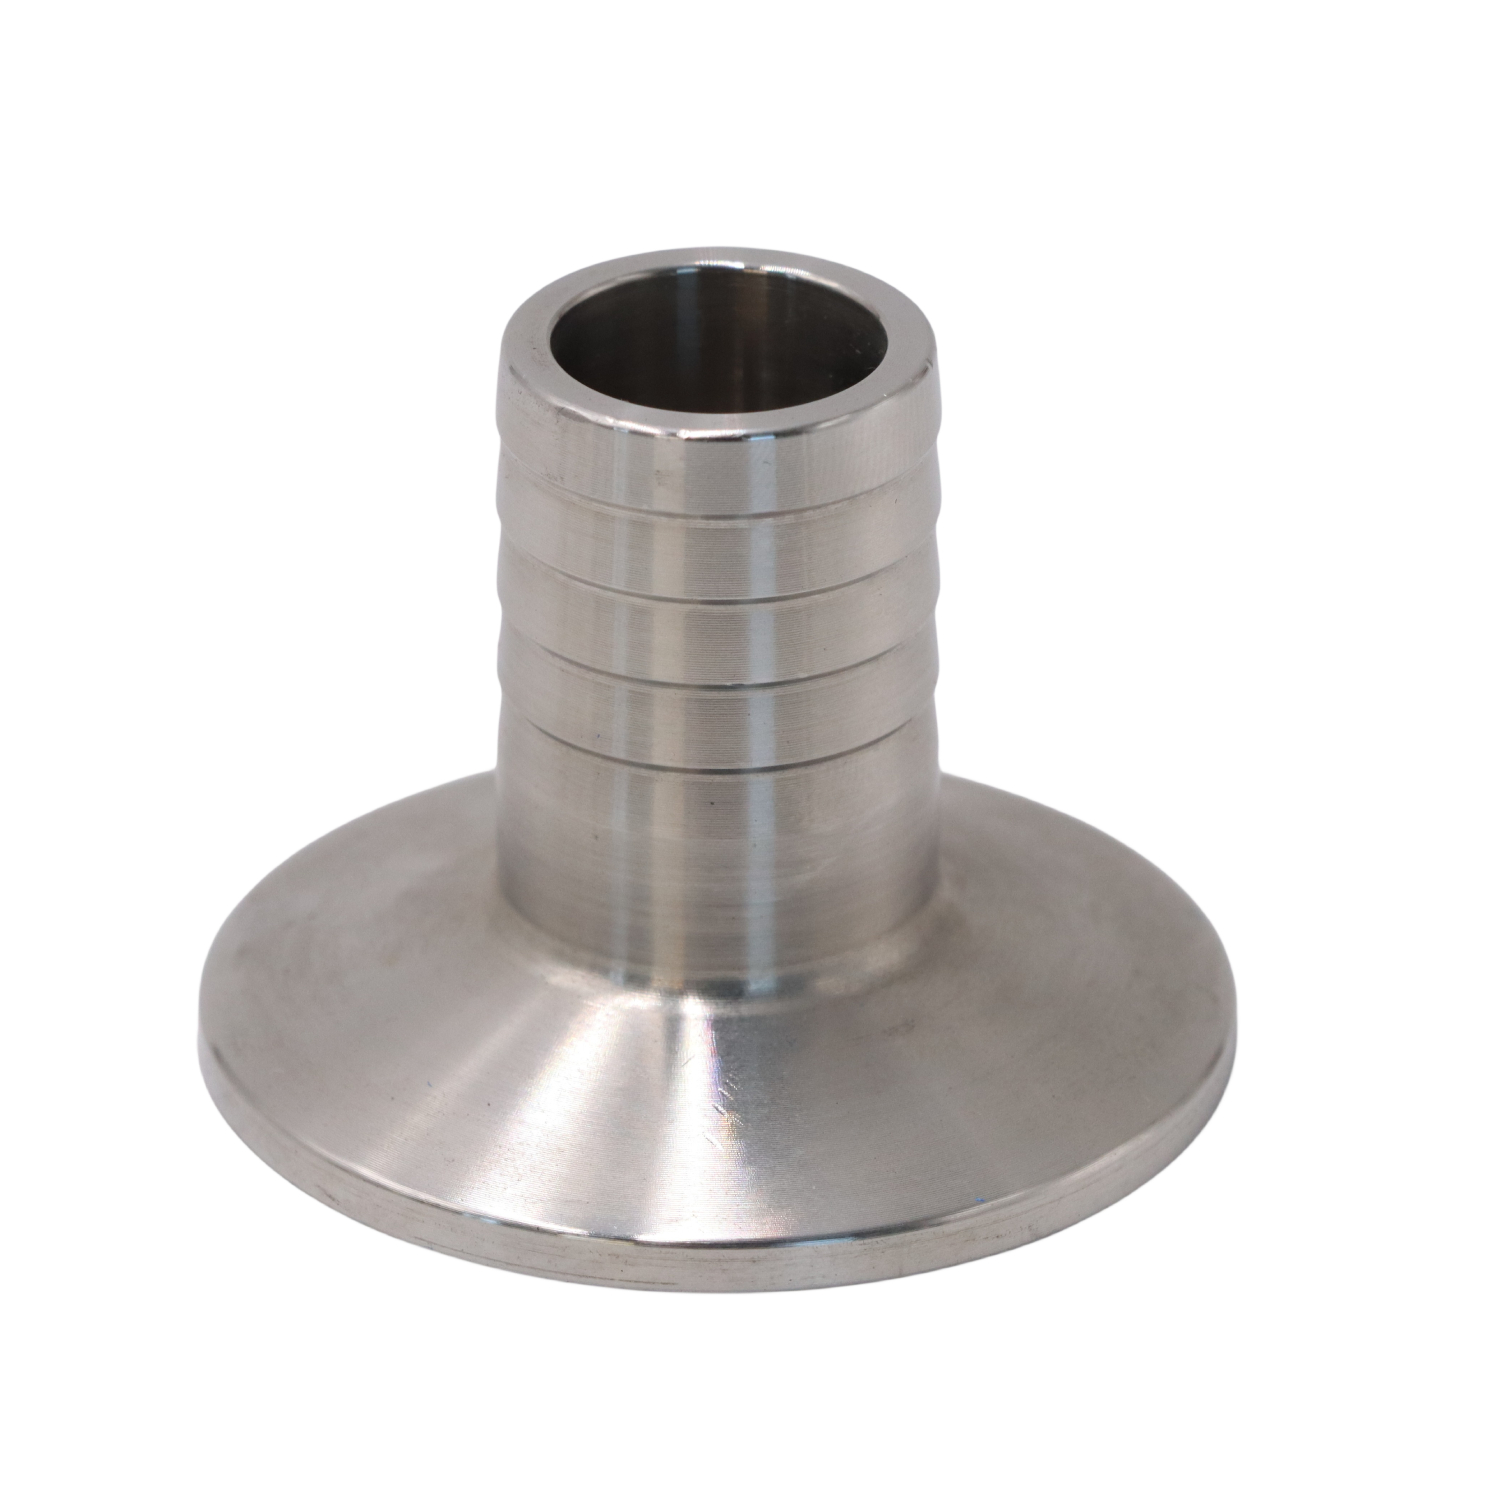 SS304 Stainless Steel Sanitary High Cleanliness JN-FL 23 2008 Clamped High Pressure Hose Coupling Adapter For Beverage Engineering